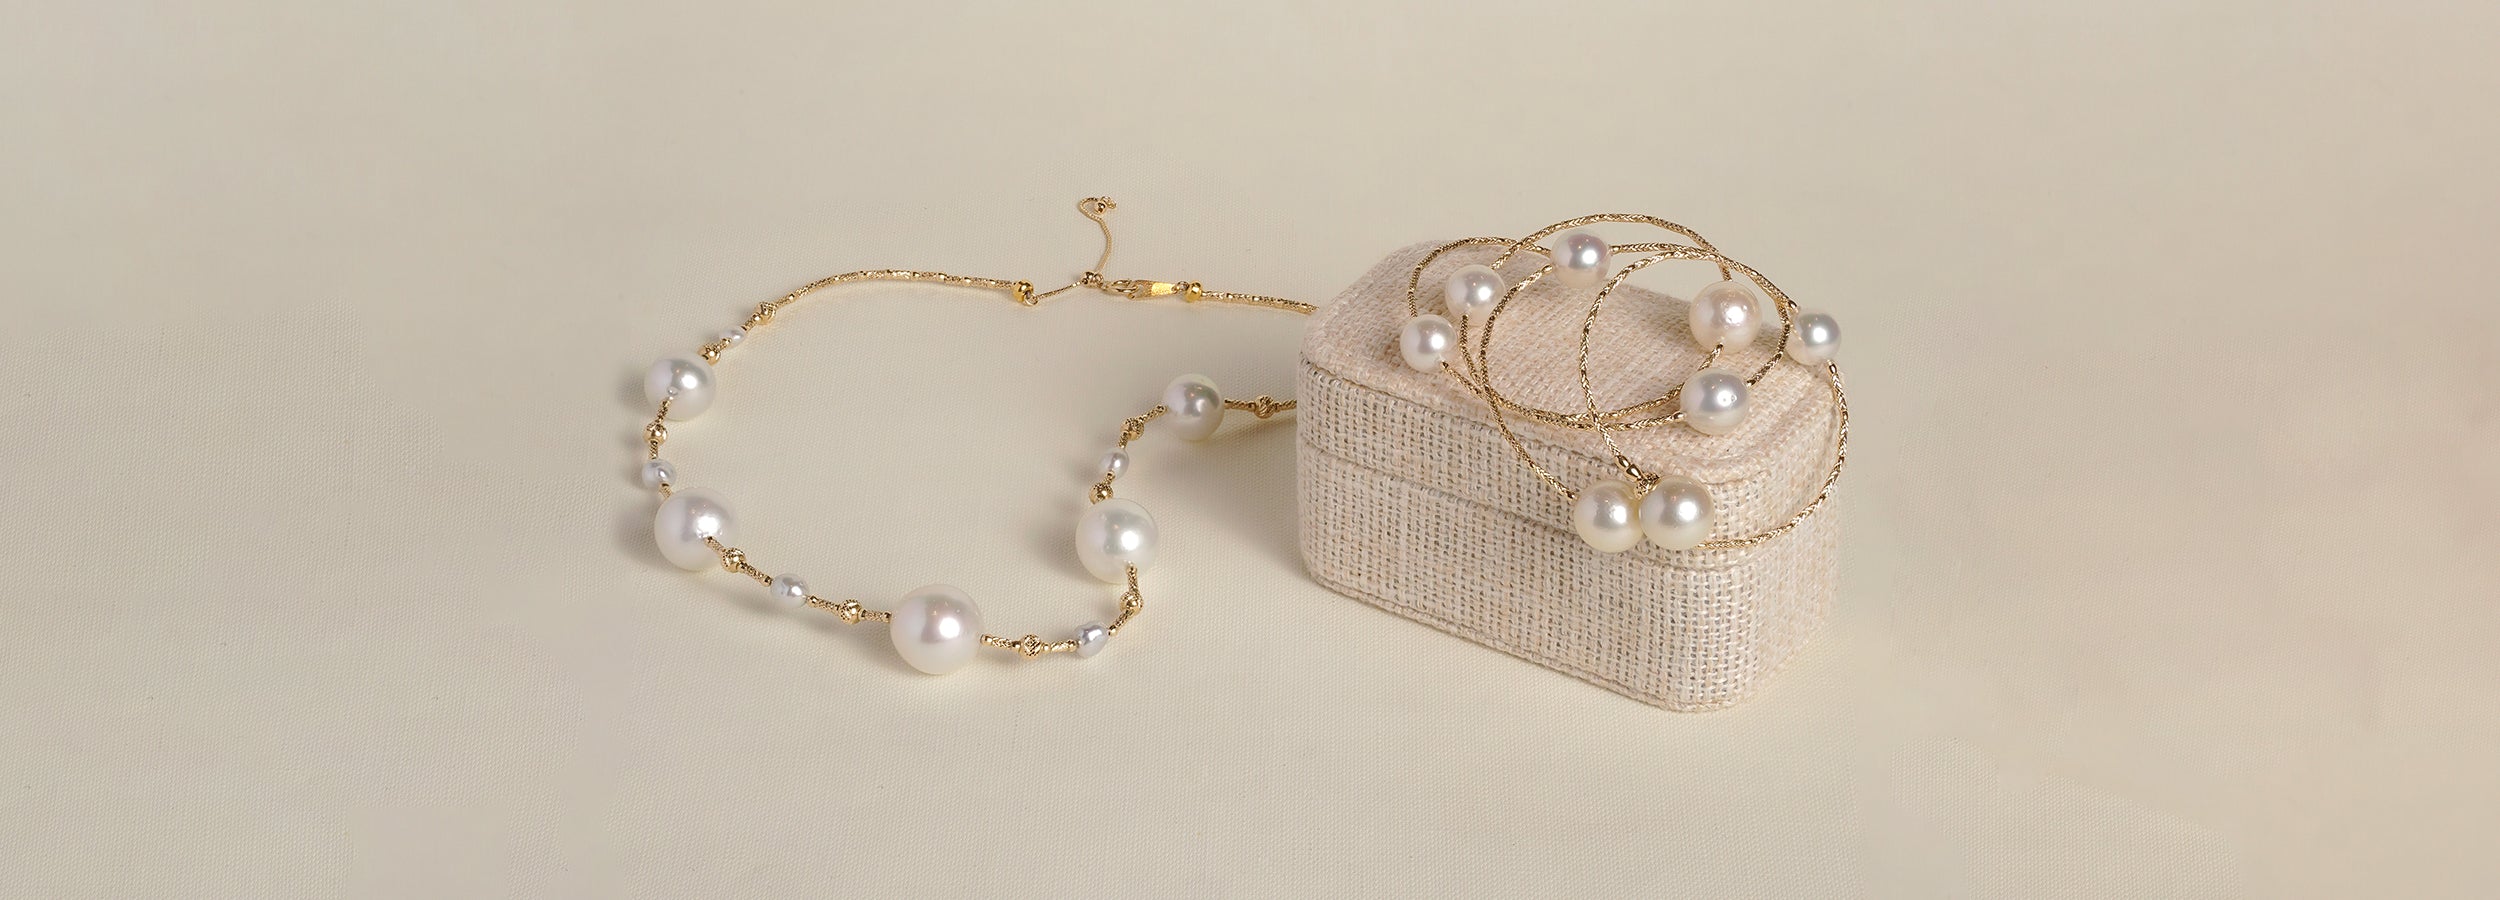 How to Distinguish Between Real and Fake Pearls